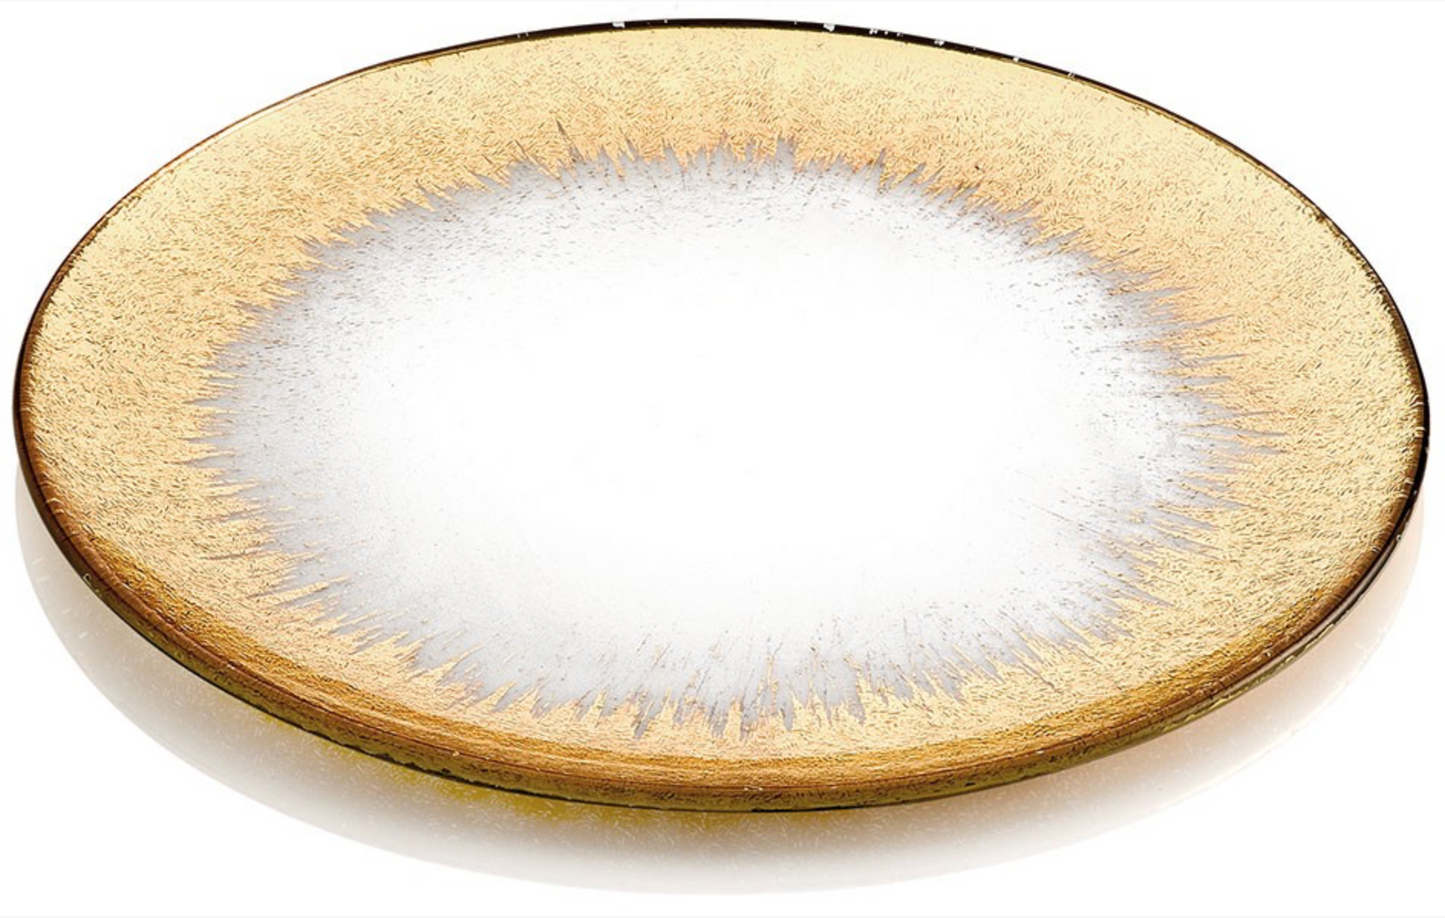 IVV Orizzonte Plate 37cm Clear Gold Decoration